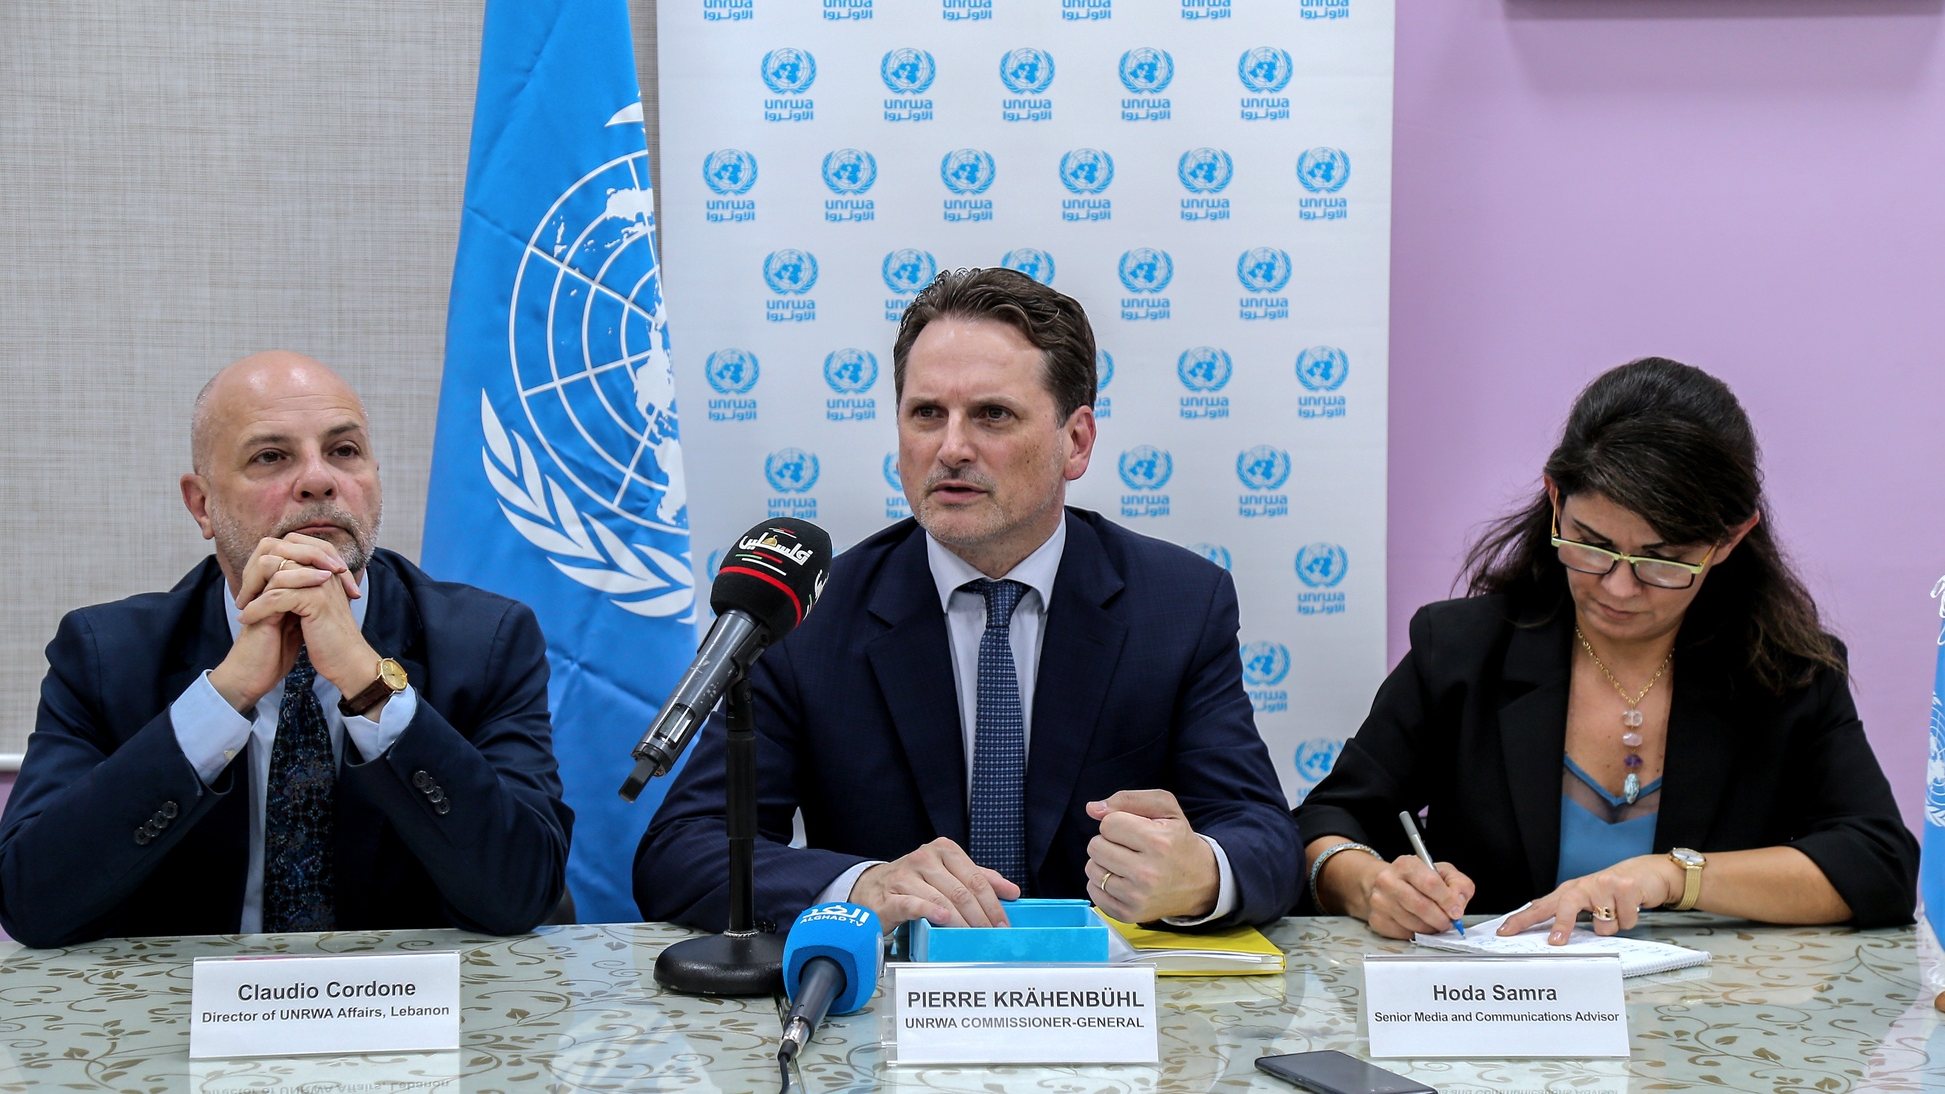 epa07837492 Commissioner-General of the United Nations Relief and Works Agency for Palestine Refugees in the Near East (UNRWA) Pierre Krahenbuhl (C) and director of UNRWA in Lebanon Claudio Cordone (L) during a press conference, at Al-Yarmouk school run by UNRWA in Bourj Barajneh Palestinian refugees camp in southern suburb of Beirut, Lebanon 12 September 2019. According to reports, Krahenbuhl attended a ceremony to mark the start of the new school season 2019-2020 in Lebanon. The US decided to cut 300 million US dollars of its funding to UNRWA last year, followed by a further 60 million US dollars in January this year, which is expected to affect services provided to nearly five million Palestinian refugees located in Syria, Jordan, Lebanon, the Gaza Strip, West Bank, and East Jerusalem.  EPA/NABIL MOUNZER